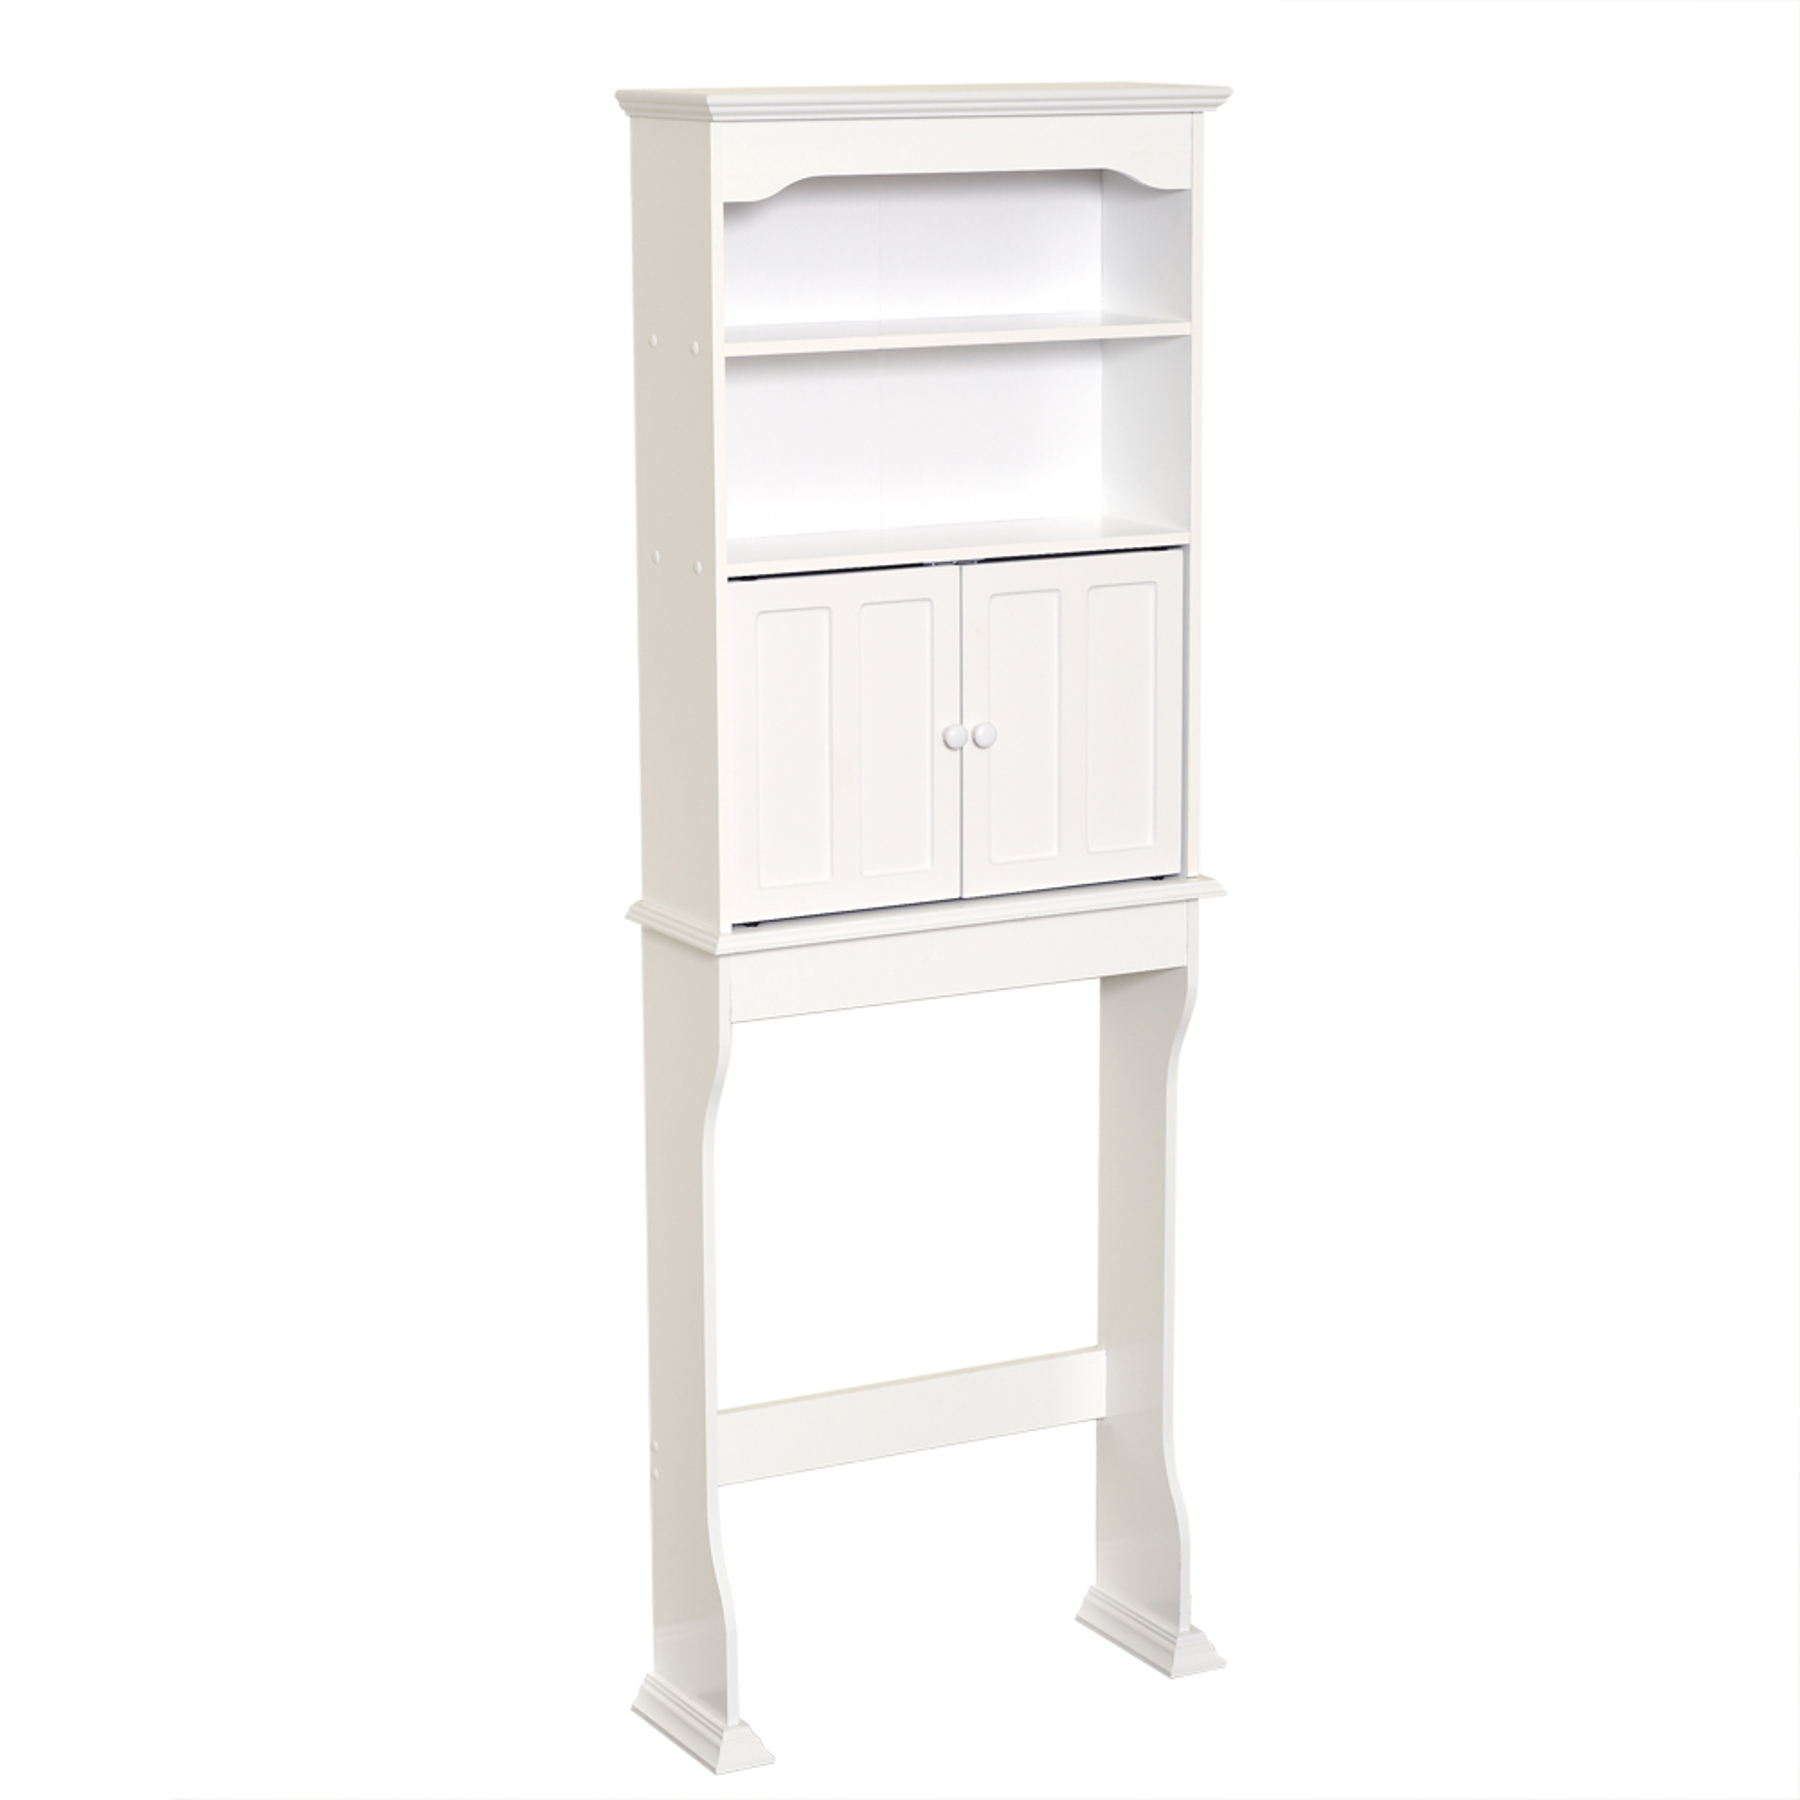 UPC 043197131362 product image for Zenith Products Callie White Wood Spacesaver | upcitemdb.com